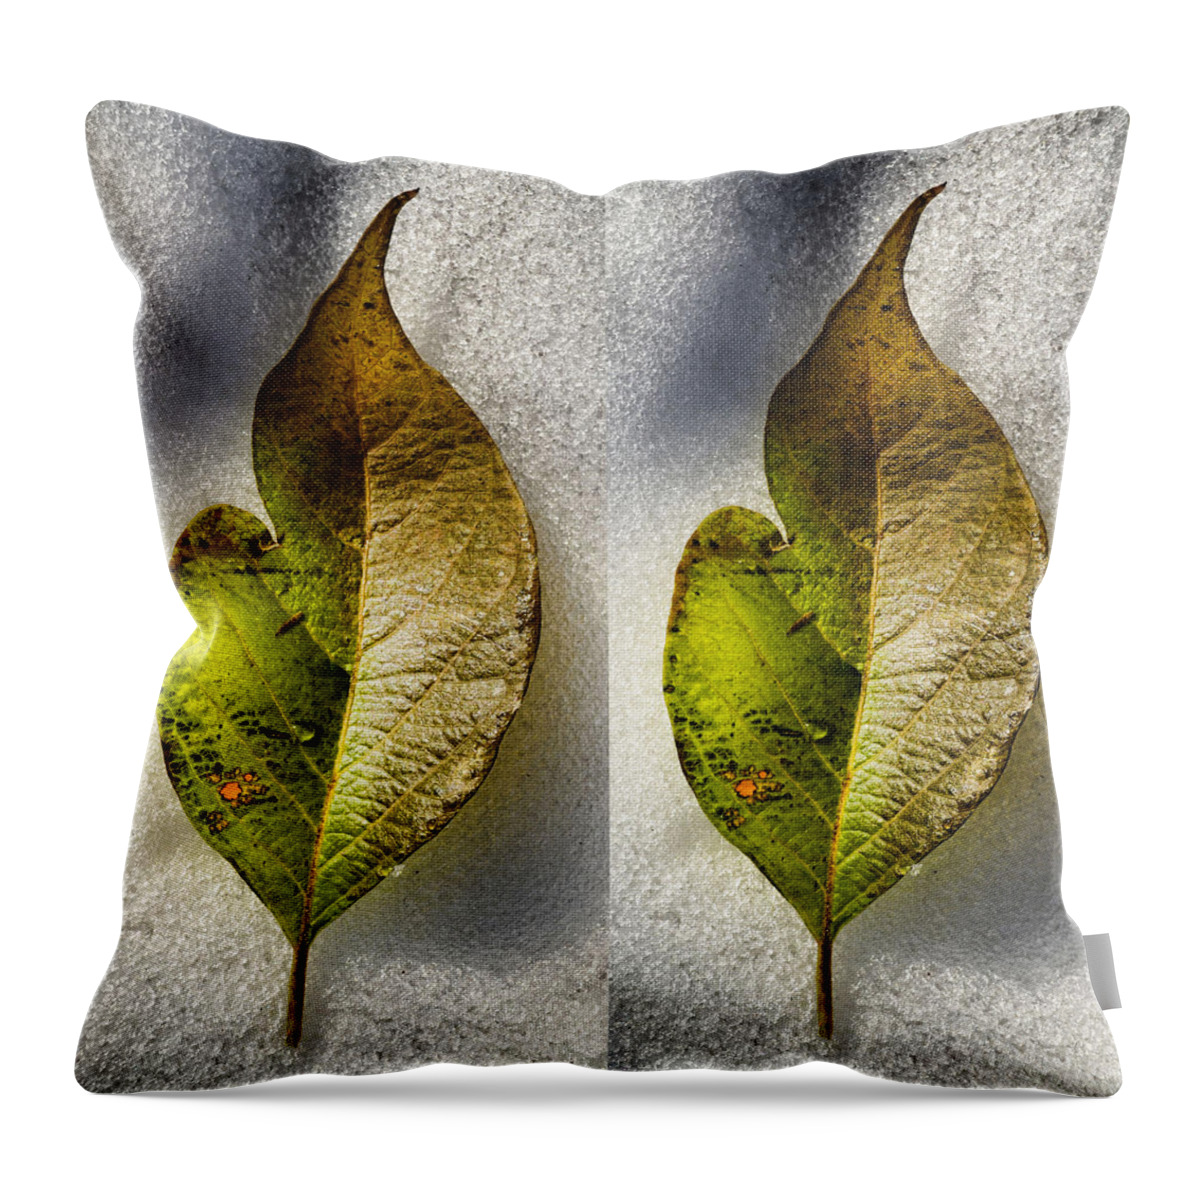 Halves Throw Pillow featuring the photograph Halves by Tom Druin